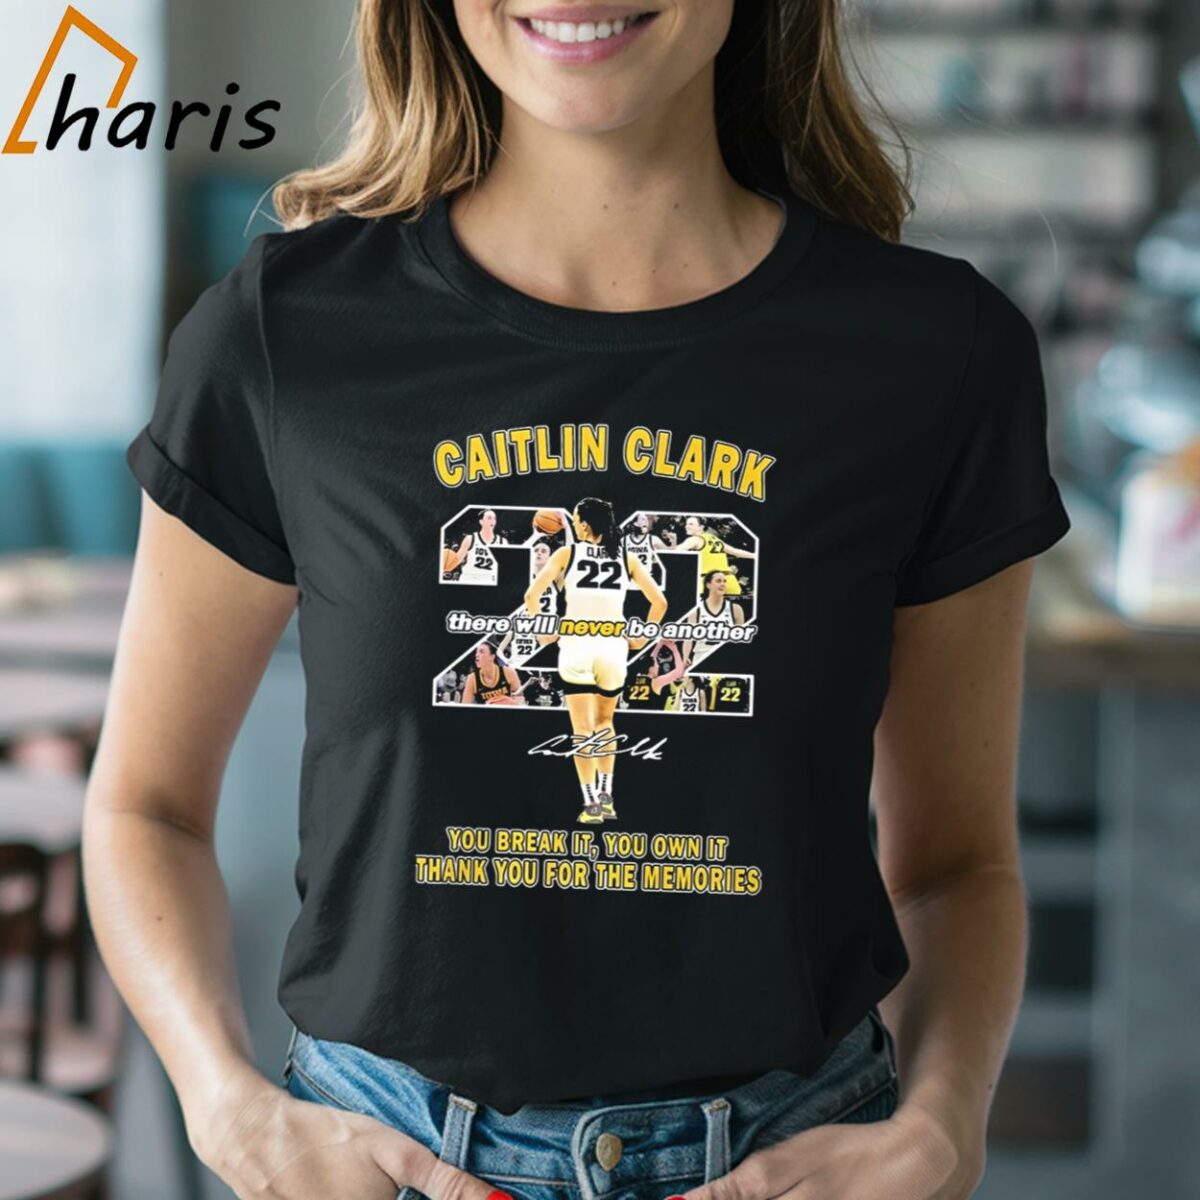 Caitlin Clark There Will Never Be Another You Break It You Own It Thank You For The Memories Signature T shirt 2 Shirt